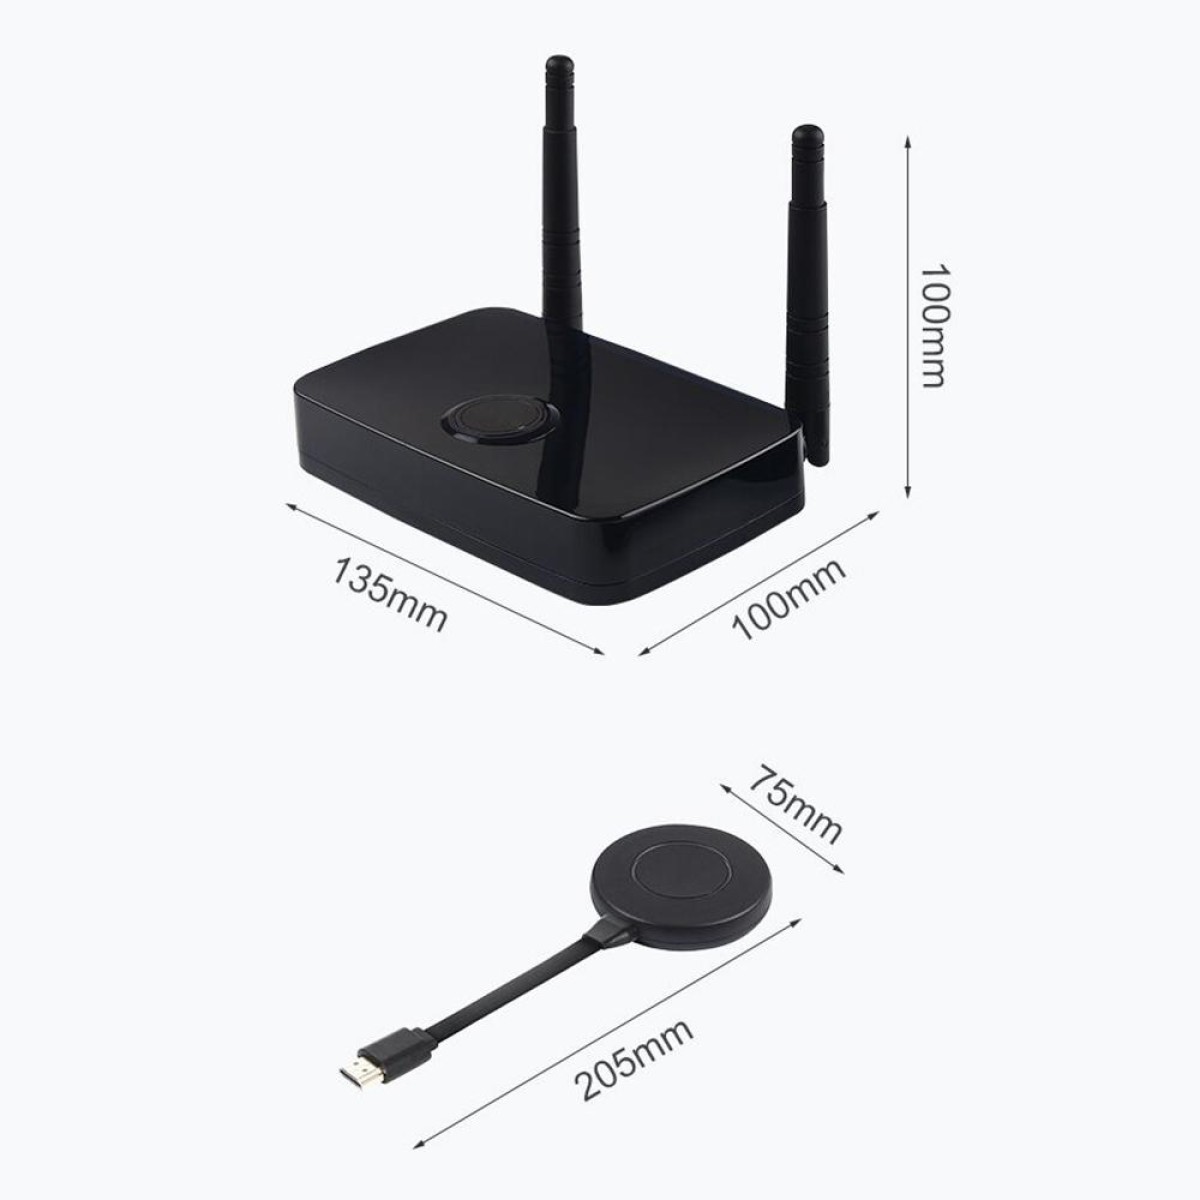 Measy UHD200 Wireless HDMI Transmitter and Receiver, Transmission Distance: 100m